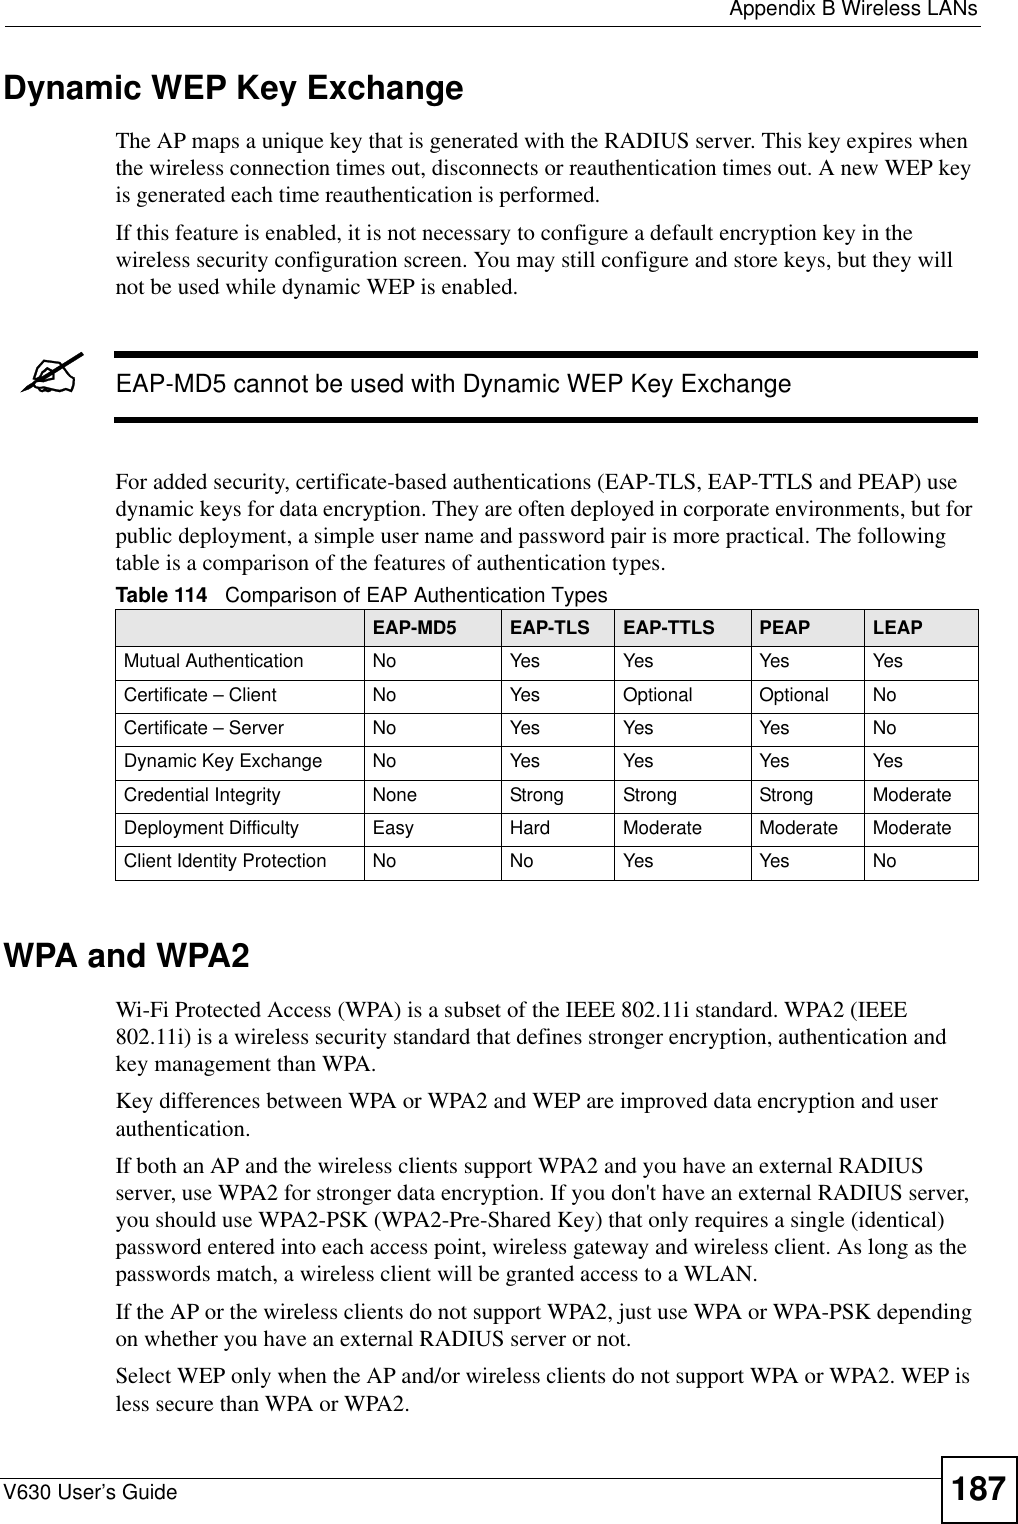  Appendix B Wireless LANsV630 User’s Guide 187Dynamic WEP Key ExchangeThe AP maps a unique key that is generated with the RADIUS server. This key expires when the wireless connection times out, disconnects or reauthentication times out. A new WEP key is generated each time reauthentication is performed.If this feature is enabled, it is not necessary to configure a default encryption key in the wireless security configuration screen. You may still configure and store keys, but they will not be used while dynamic WEP is enabled.&quot;EAP-MD5 cannot be used with Dynamic WEP Key ExchangeFor added security, certificate-based authentications (EAP-TLS, EAP-TTLS and PEAP) use dynamic keys for data encryption. They are often deployed in corporate environments, but for public deployment, a simple user name and password pair is more practical. The following table is a comparison of the features of authentication types.WPA and WPA2Wi-Fi Protected Access (WPA) is a subset of the IEEE 802.11i standard. WPA2 (IEEE 802.11i) is a wireless security standard that defines stronger encryption, authentication and key management than WPA. Key differences between WPA or WPA2 and WEP are improved data encryption and user authentication.If both an AP and the wireless clients support WPA2 and you have an external RADIUS server, use WPA2 for stronger data encryption. If you don&apos;t have an external RADIUS server, you should use WPA2-PSK (WPA2-Pre-Shared Key) that only requires a single (identical) password entered into each access point, wireless gateway and wireless client. As long as the passwords match, a wireless client will be granted access to a WLAN. If the AP or the wireless clients do not support WPA2, just use WPA or WPA-PSK depending on whether you have an external RADIUS server or not.Select WEP only when the AP and/or wireless clients do not support WPA or WPA2. WEP is less secure than WPA or WPA2.Table 114   Comparison of EAP Authentication TypesEAP-MD5 EAP-TLS EAP-TTLS PEAP LEAPMutual Authentication No Yes Yes Yes YesCertificate – Client No Yes Optional Optional NoCertificate – Server No Yes Yes Yes NoDynamic Key Exchange No Yes Yes Yes YesCredential Integrity None Strong Strong Strong ModerateDeployment Difficulty Easy Hard Moderate Moderate ModerateClient Identity Protection No No Yes Yes No